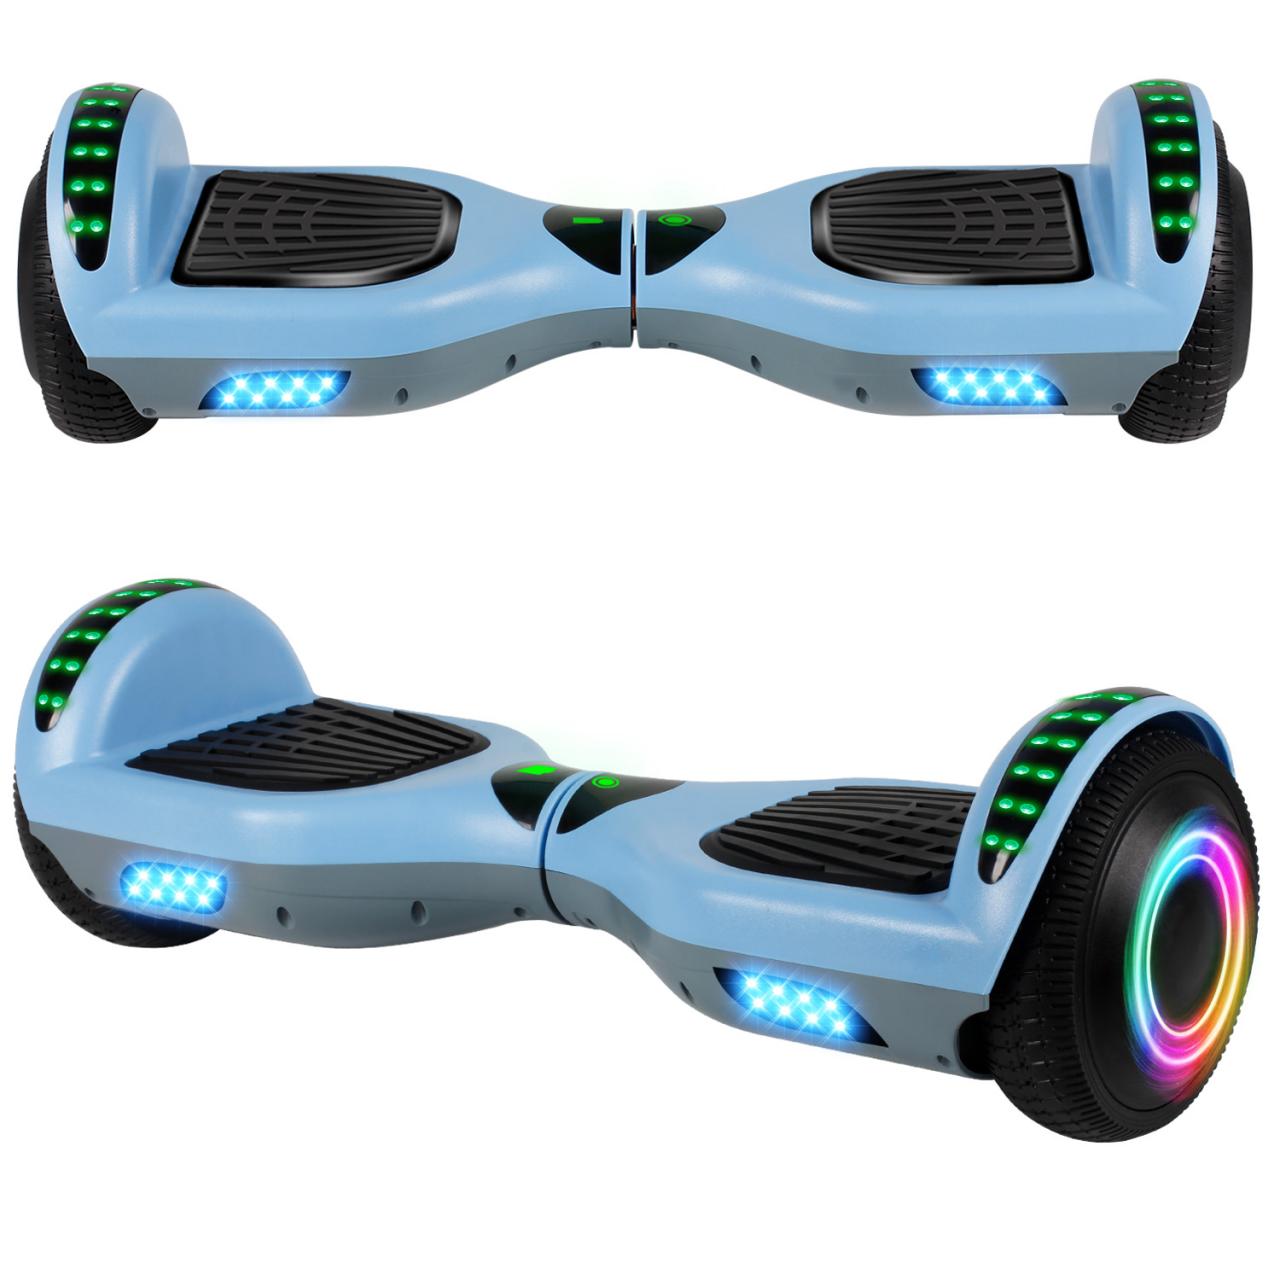 Buy SISIGAD Hoverboard, 6.5 Two-Wheel Self Balancing Hoverboard, Smart  Hover Board for Kids Gift Online in Taiwan. B08PVH6BTG